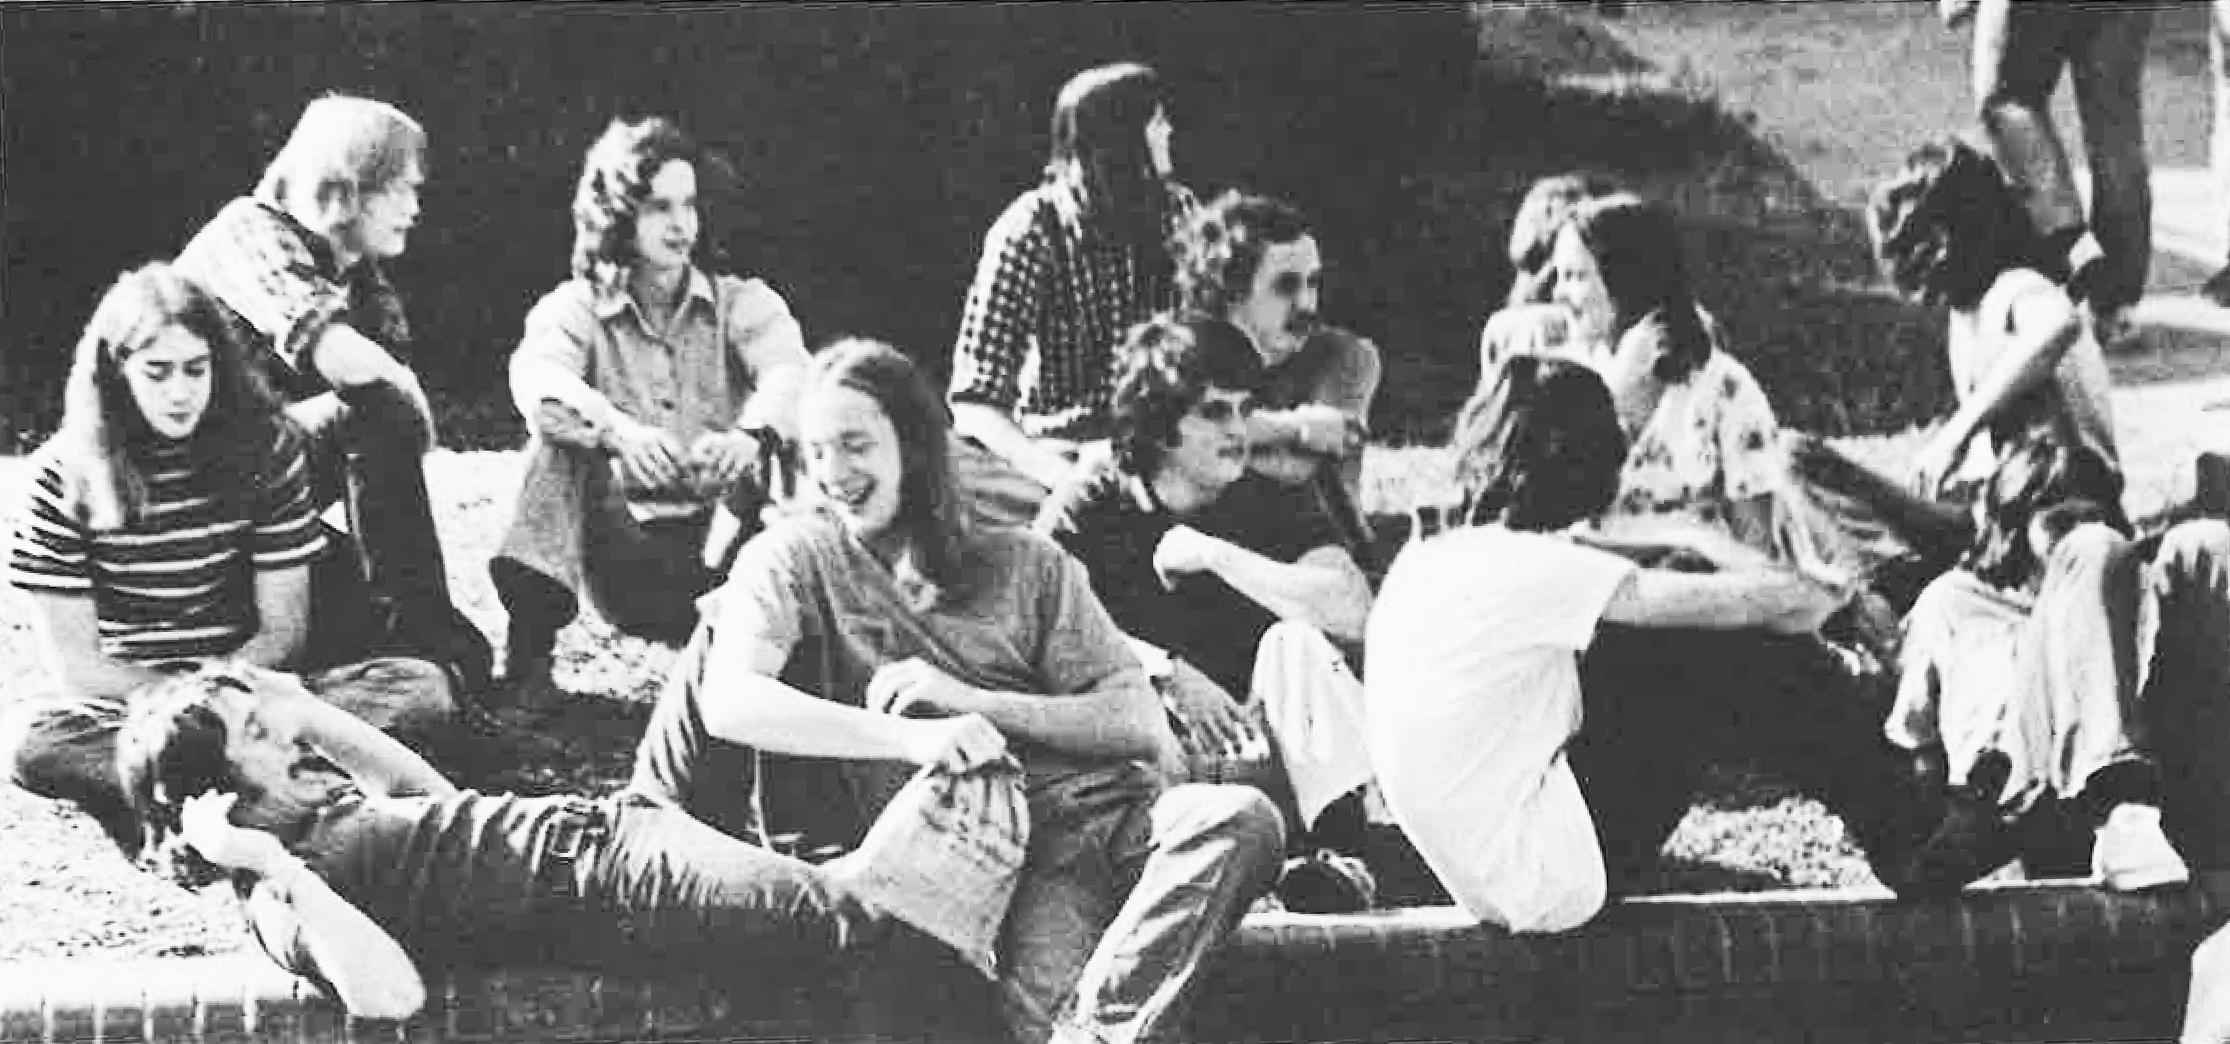 1974 Group Lounging